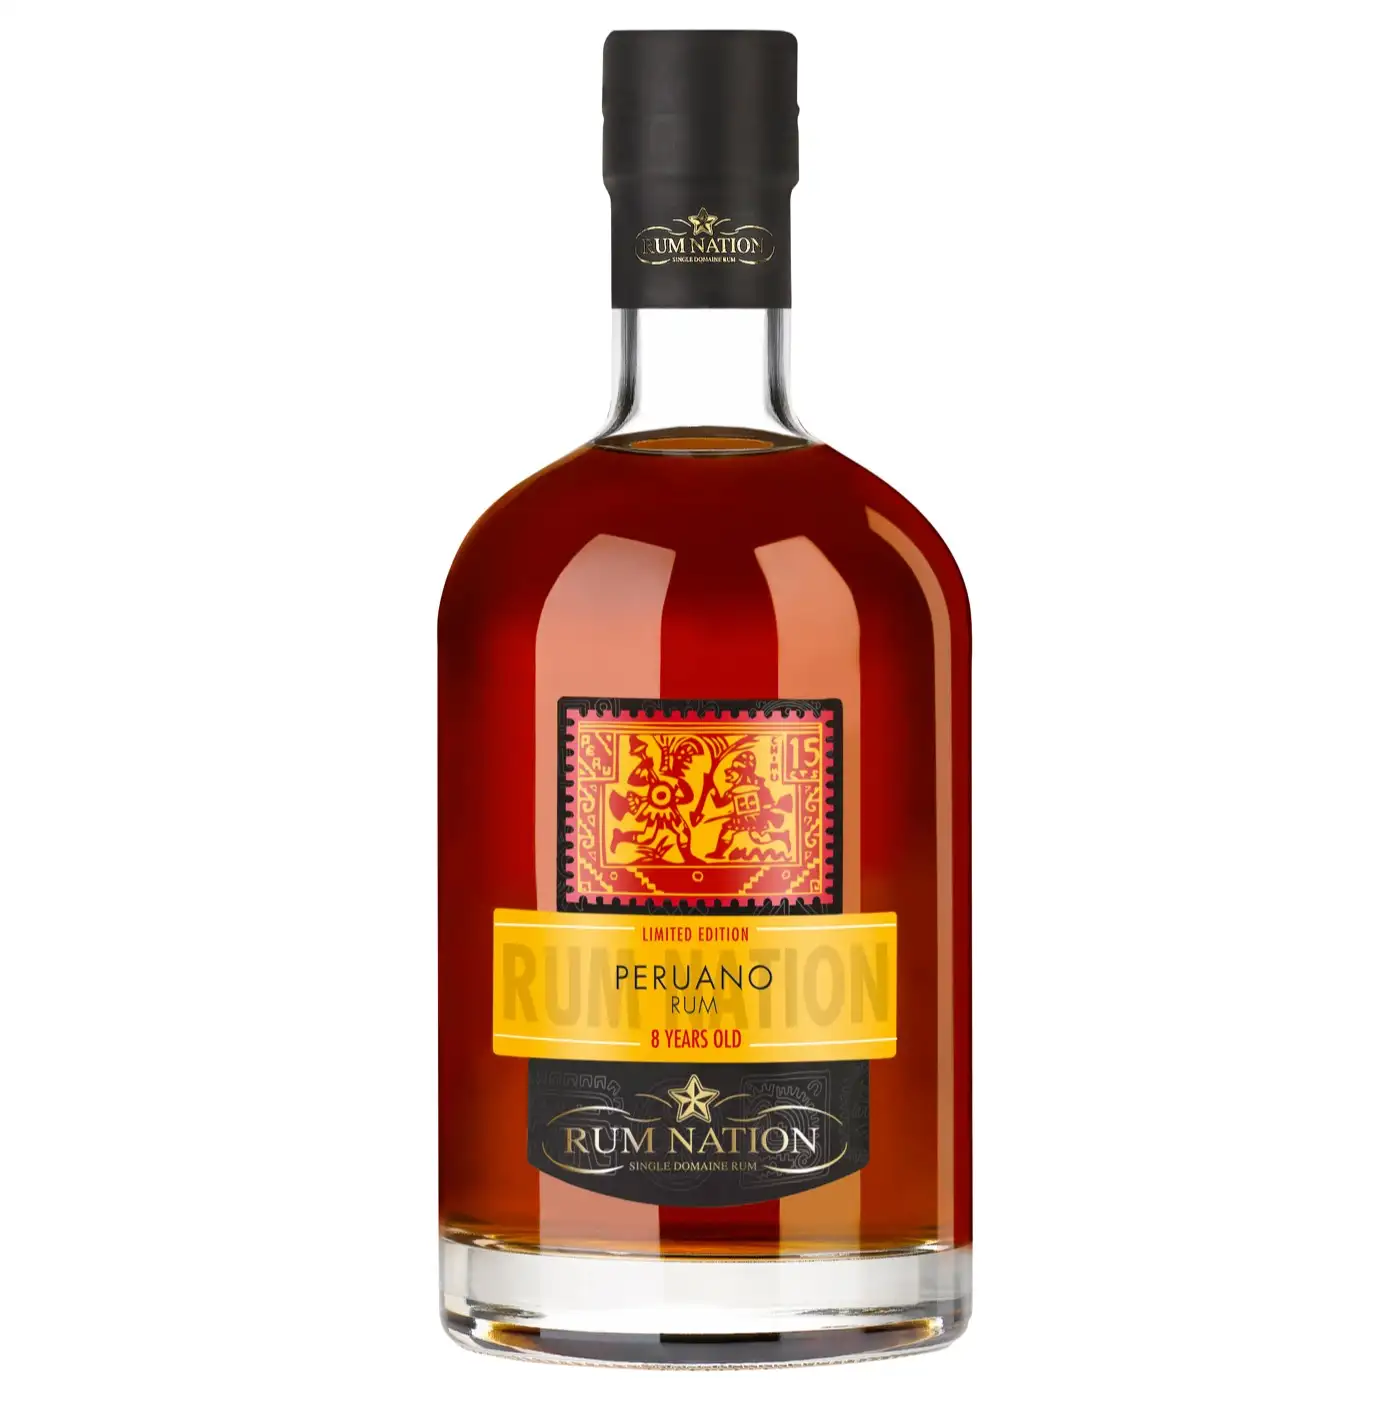 Image of the front of the bottle of the rum Peruano Limited Edition 2015